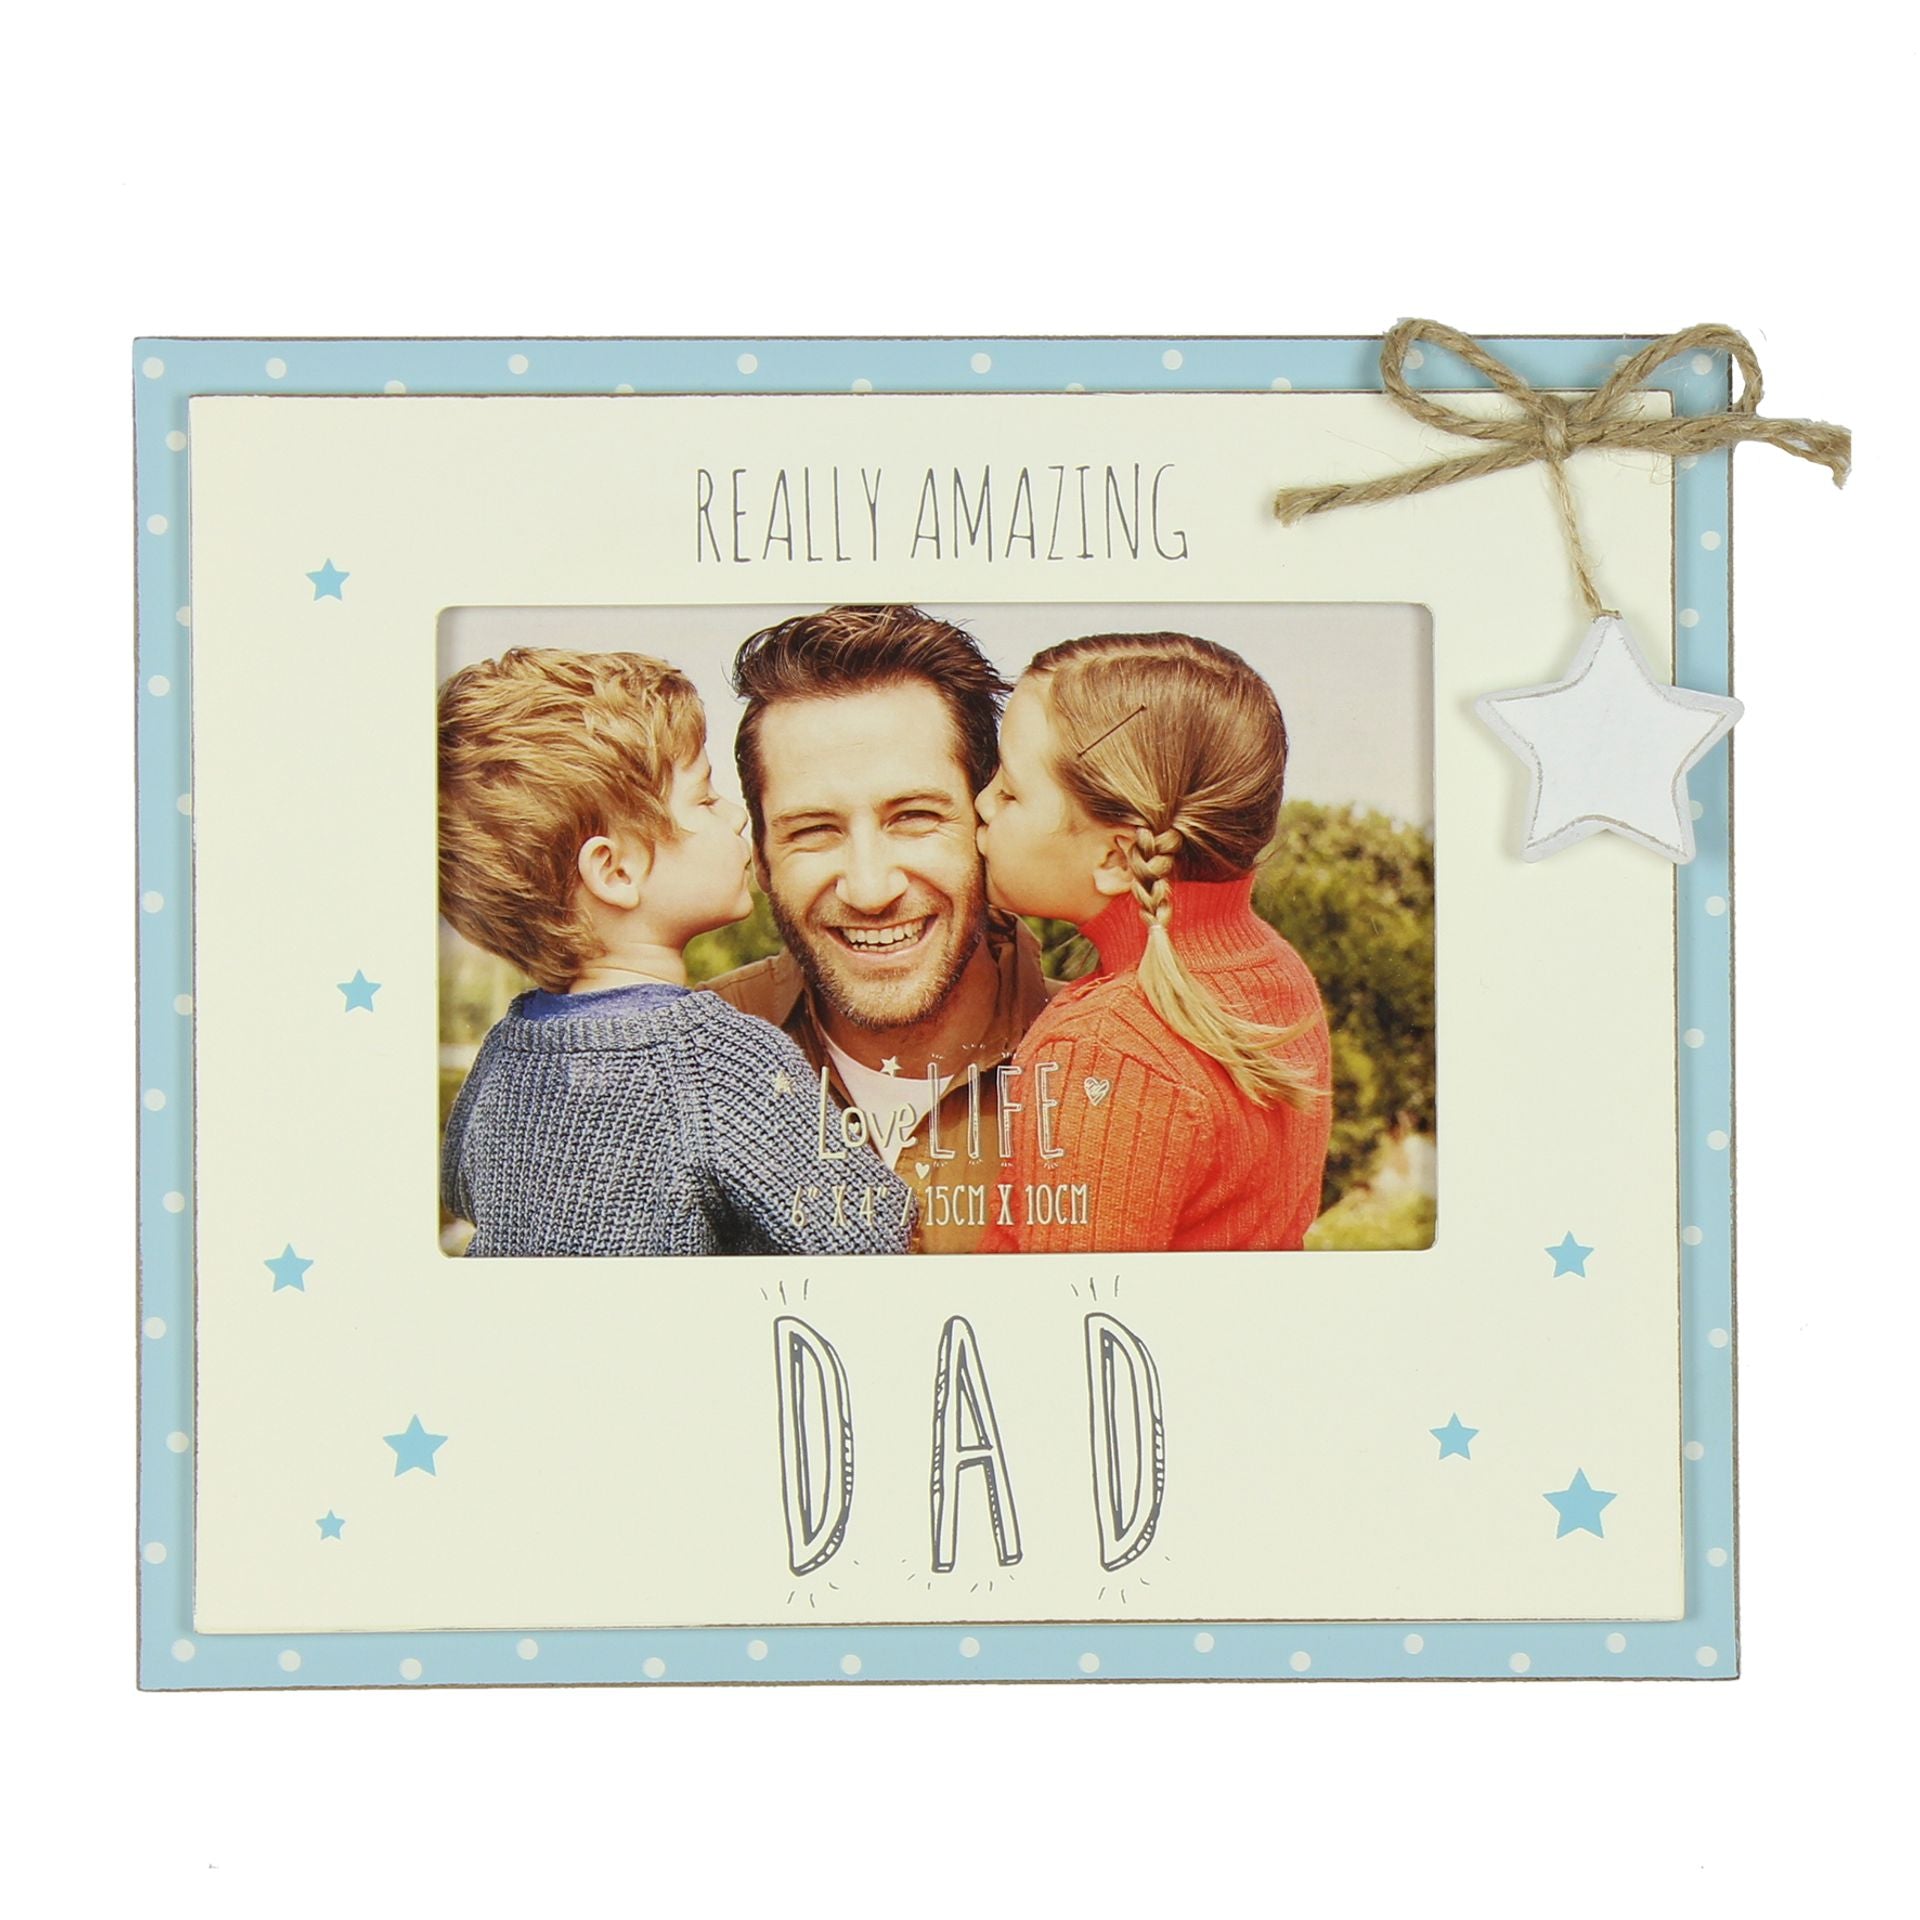 The stylish blue polka dot frame makes for the perfect gift on Father’s Day, their birthday or any other special occasion. 